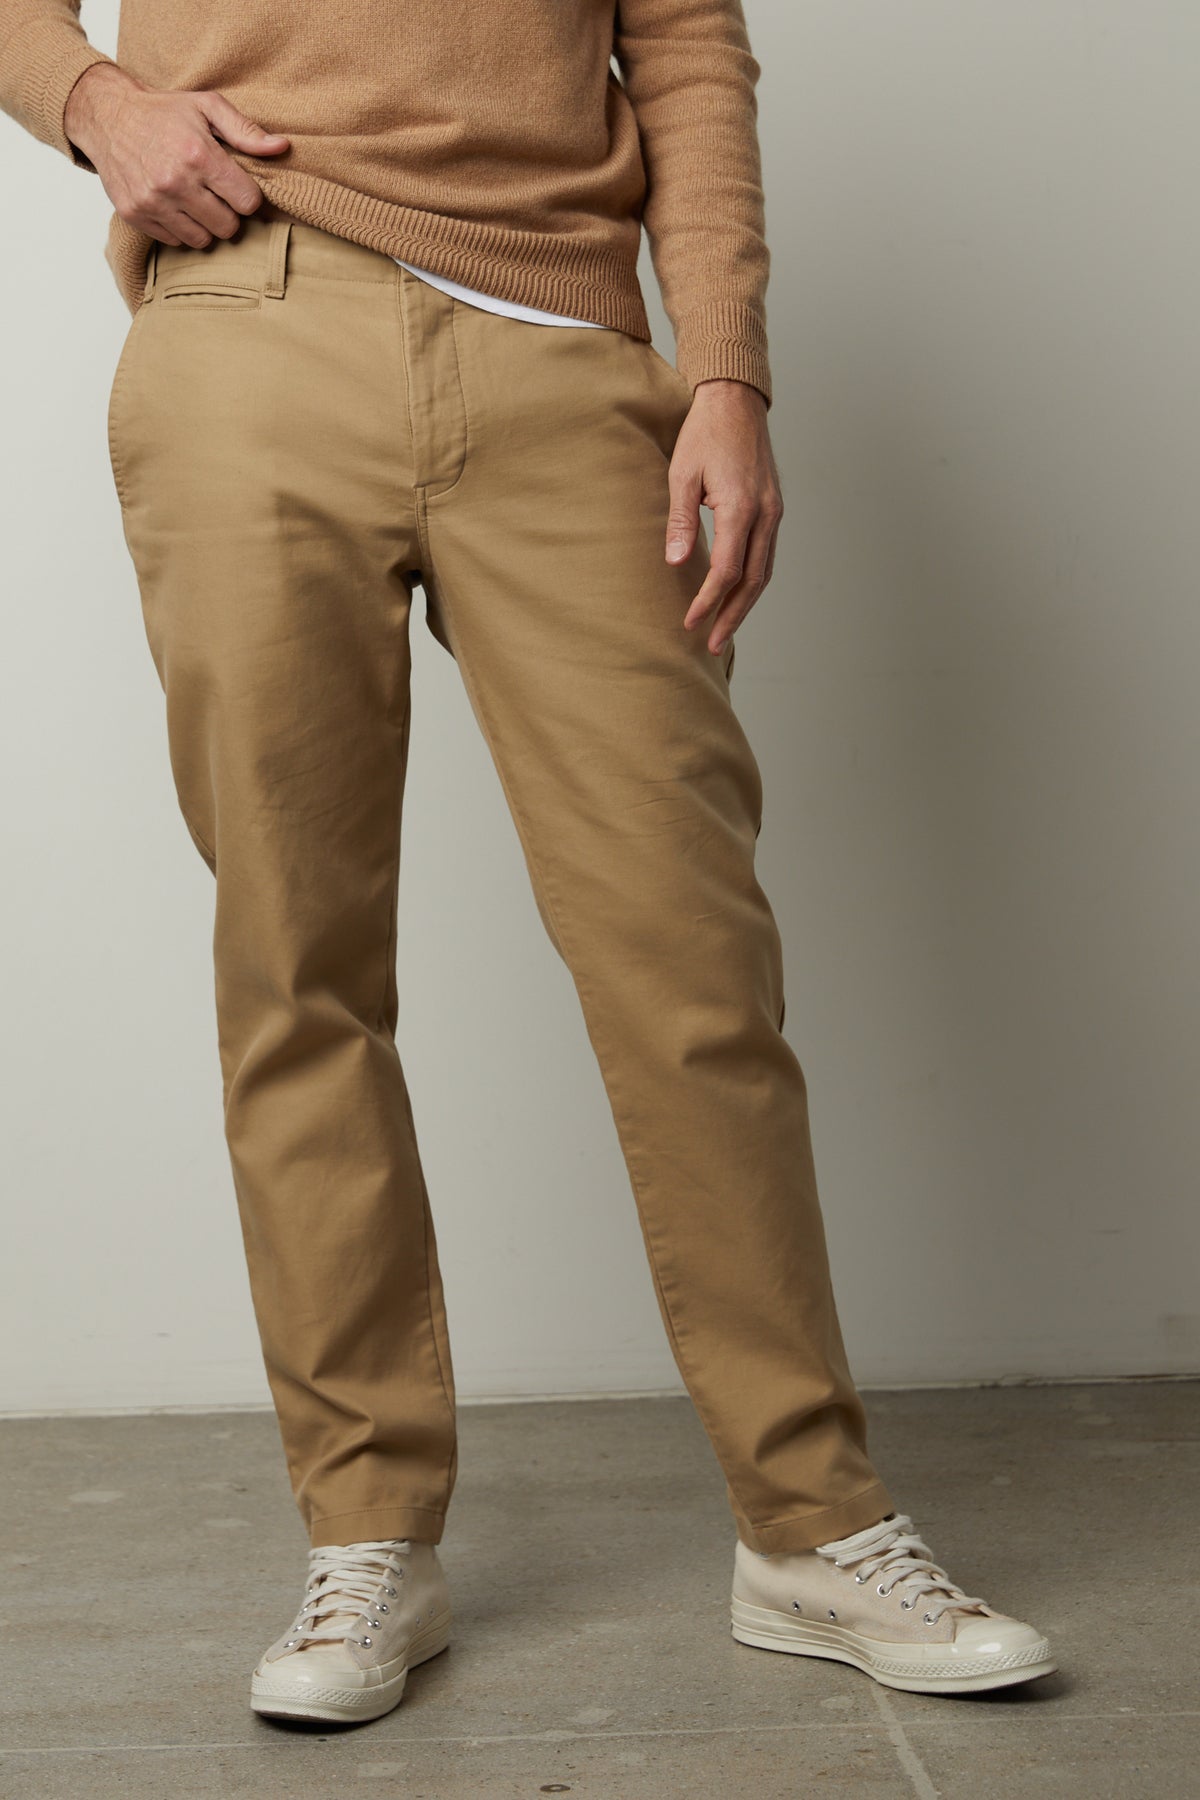 H&M Loose Fit Twill Dress Pants | CoolSprings Galleria